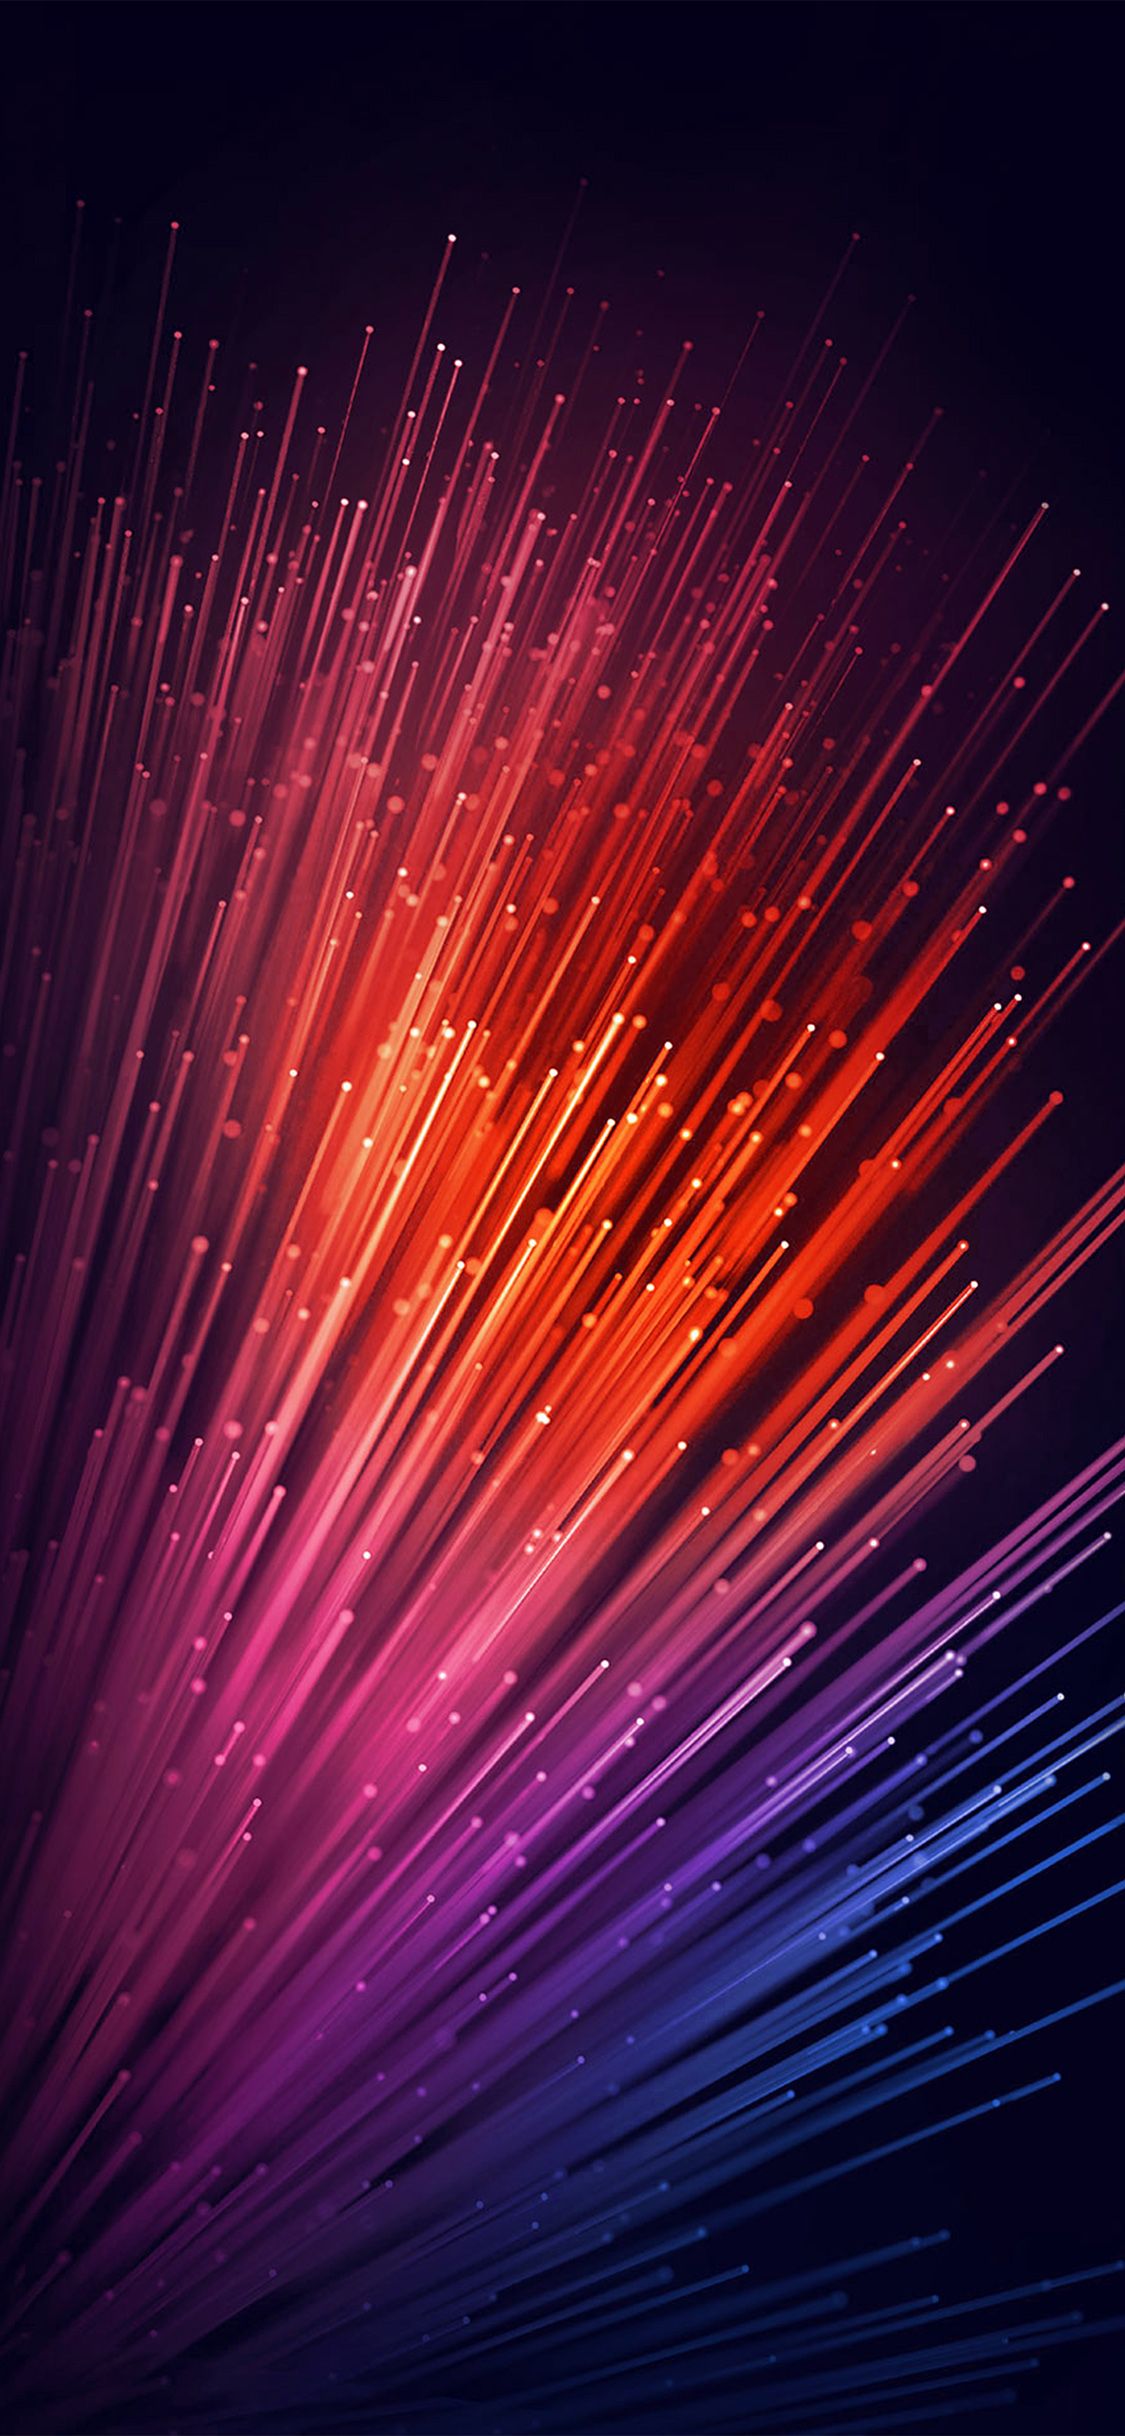 iPhone X wallpaper. simple rainbow line awesome pattern background red